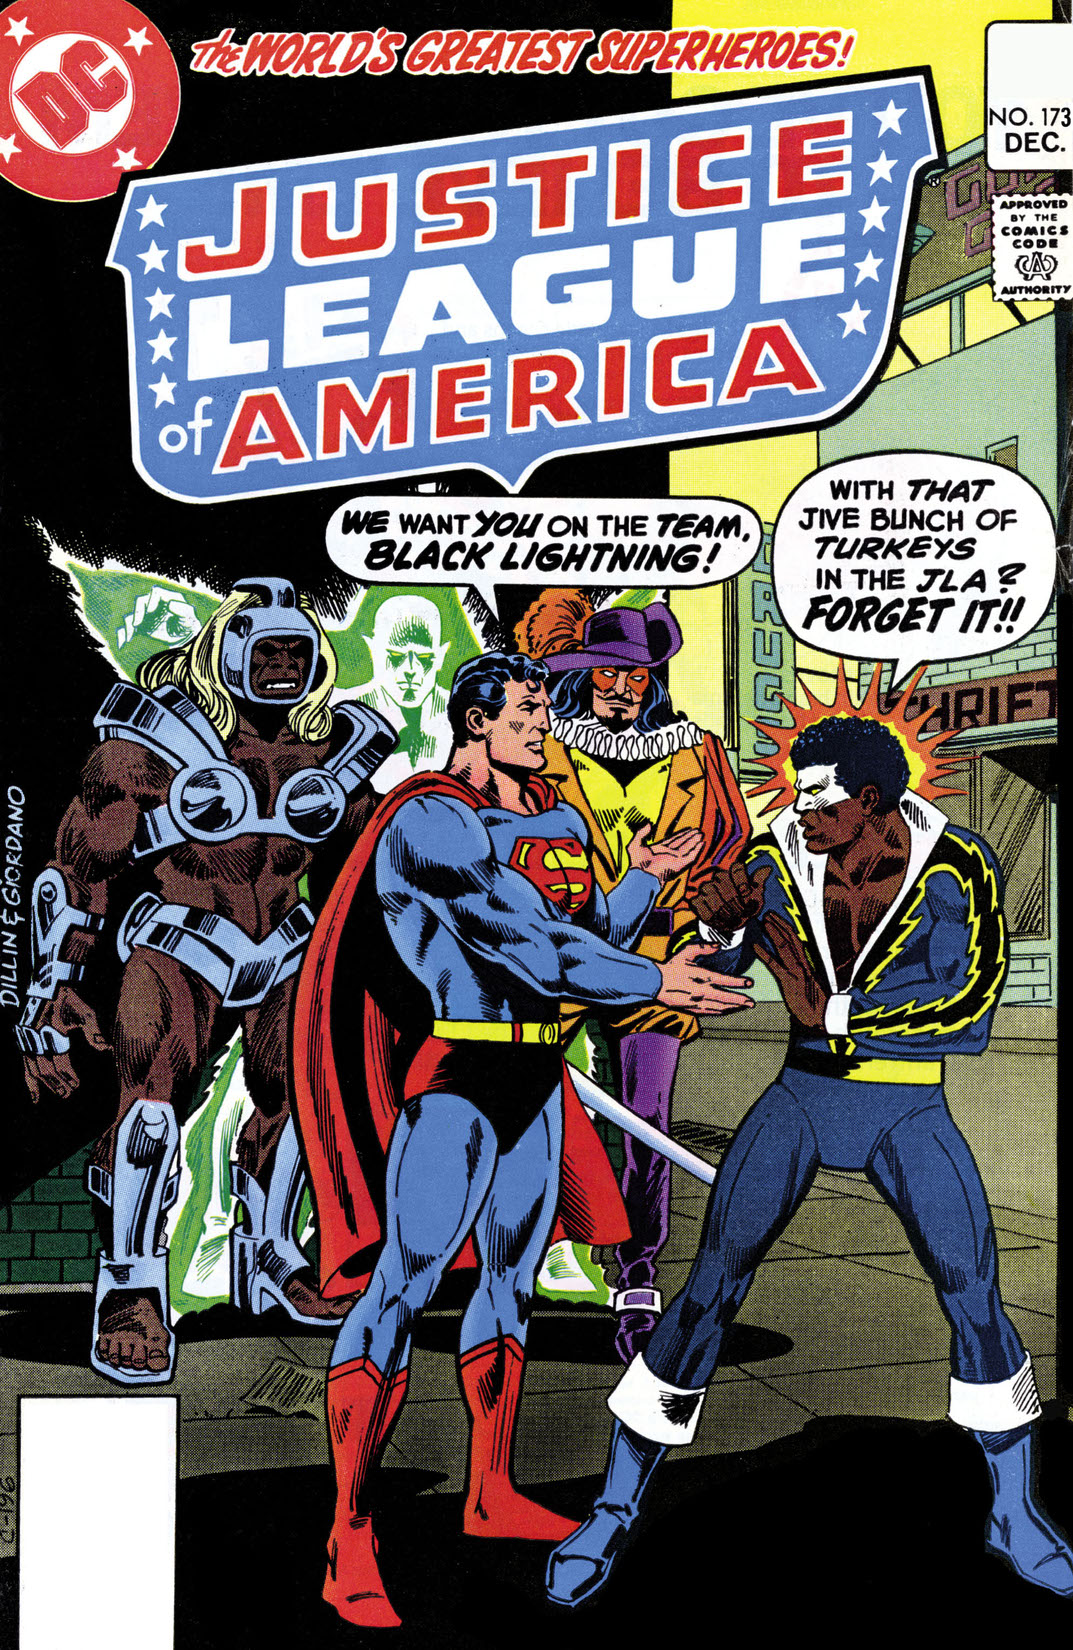 Justice League of America (1960-) #173 preview images